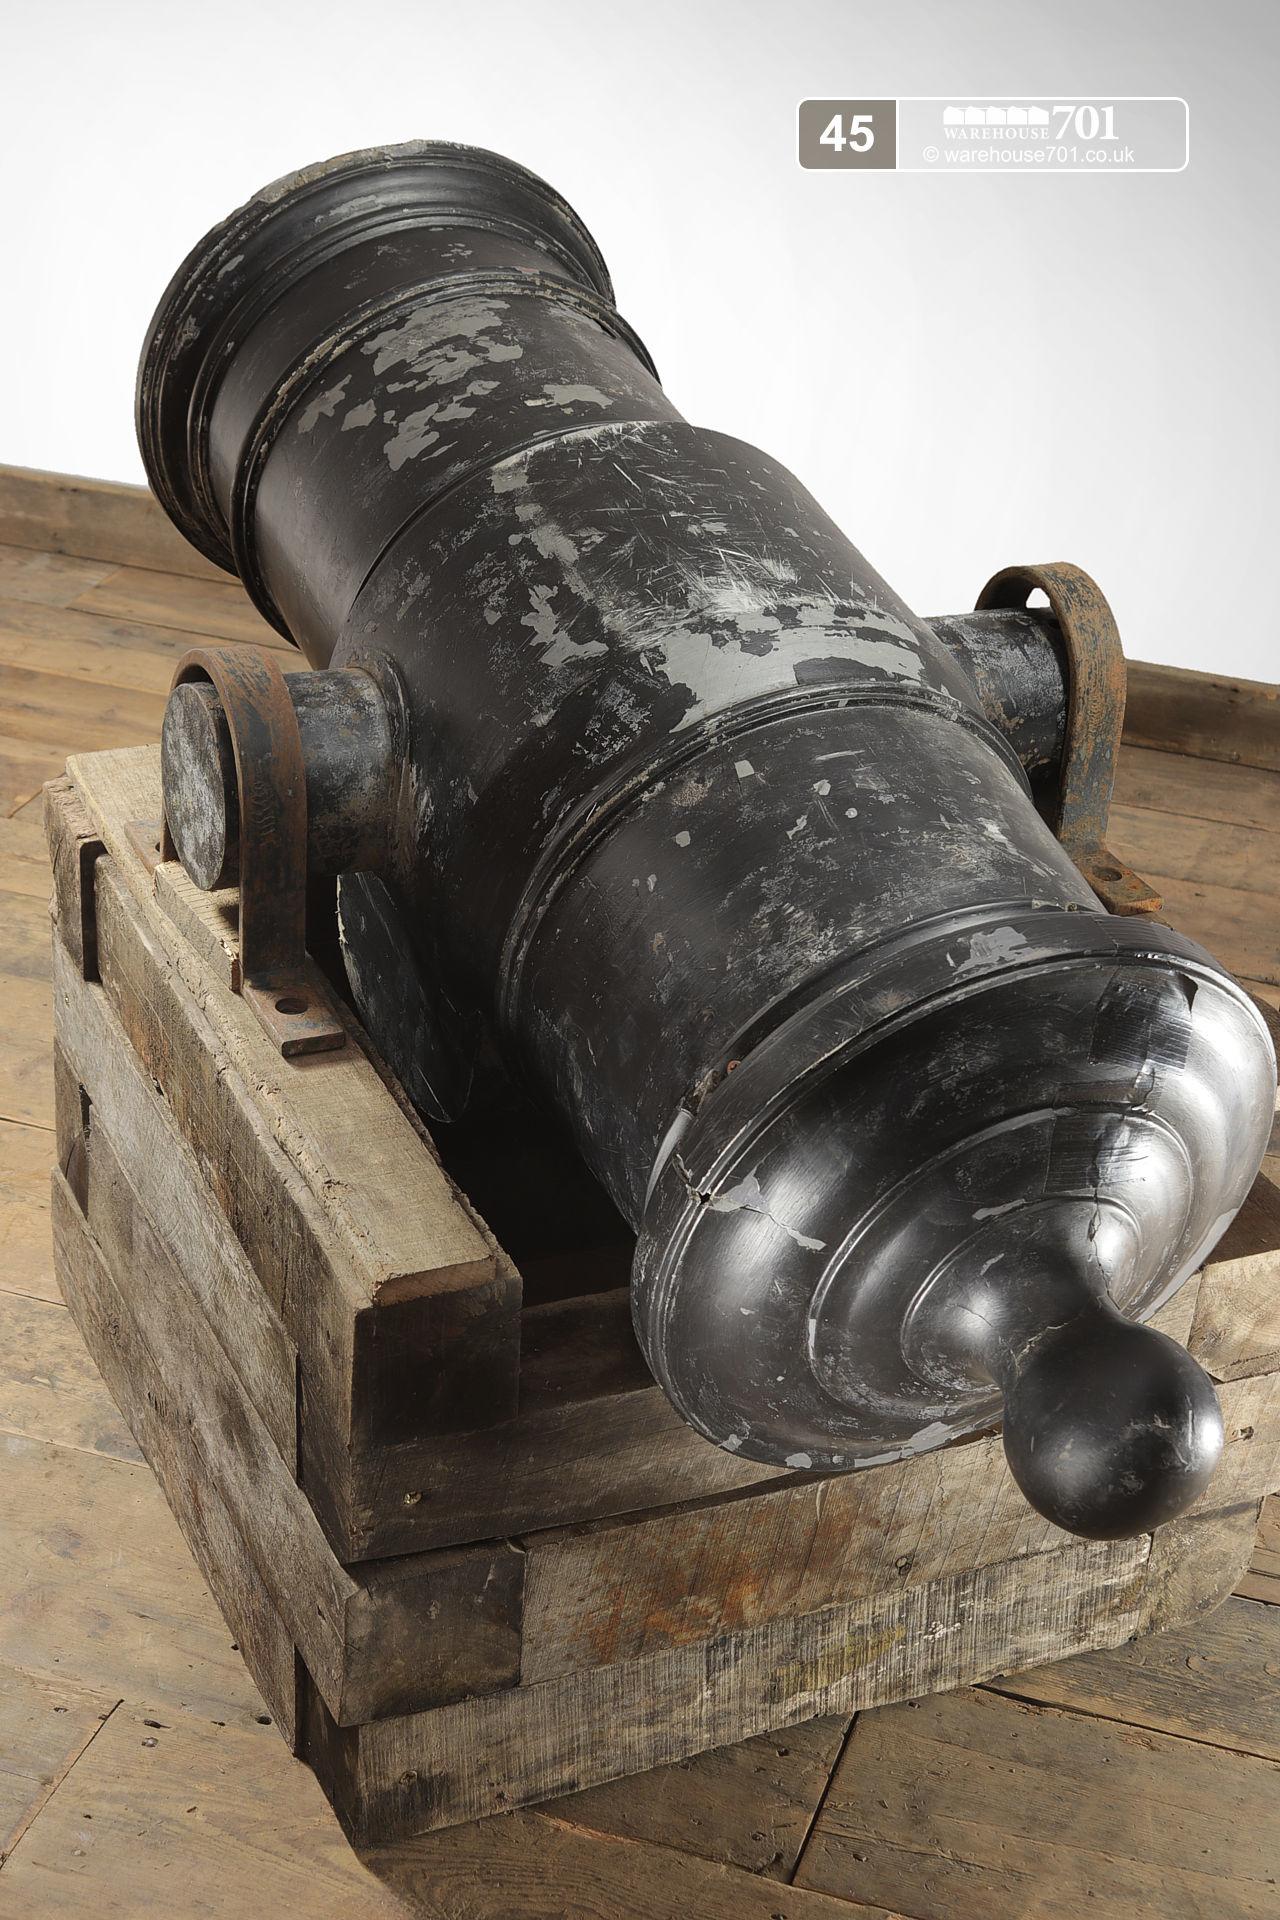 Large Fibreglass Mortar or Cannon Foundry Pattern (No's 45) for Shop, Retail and Home Display